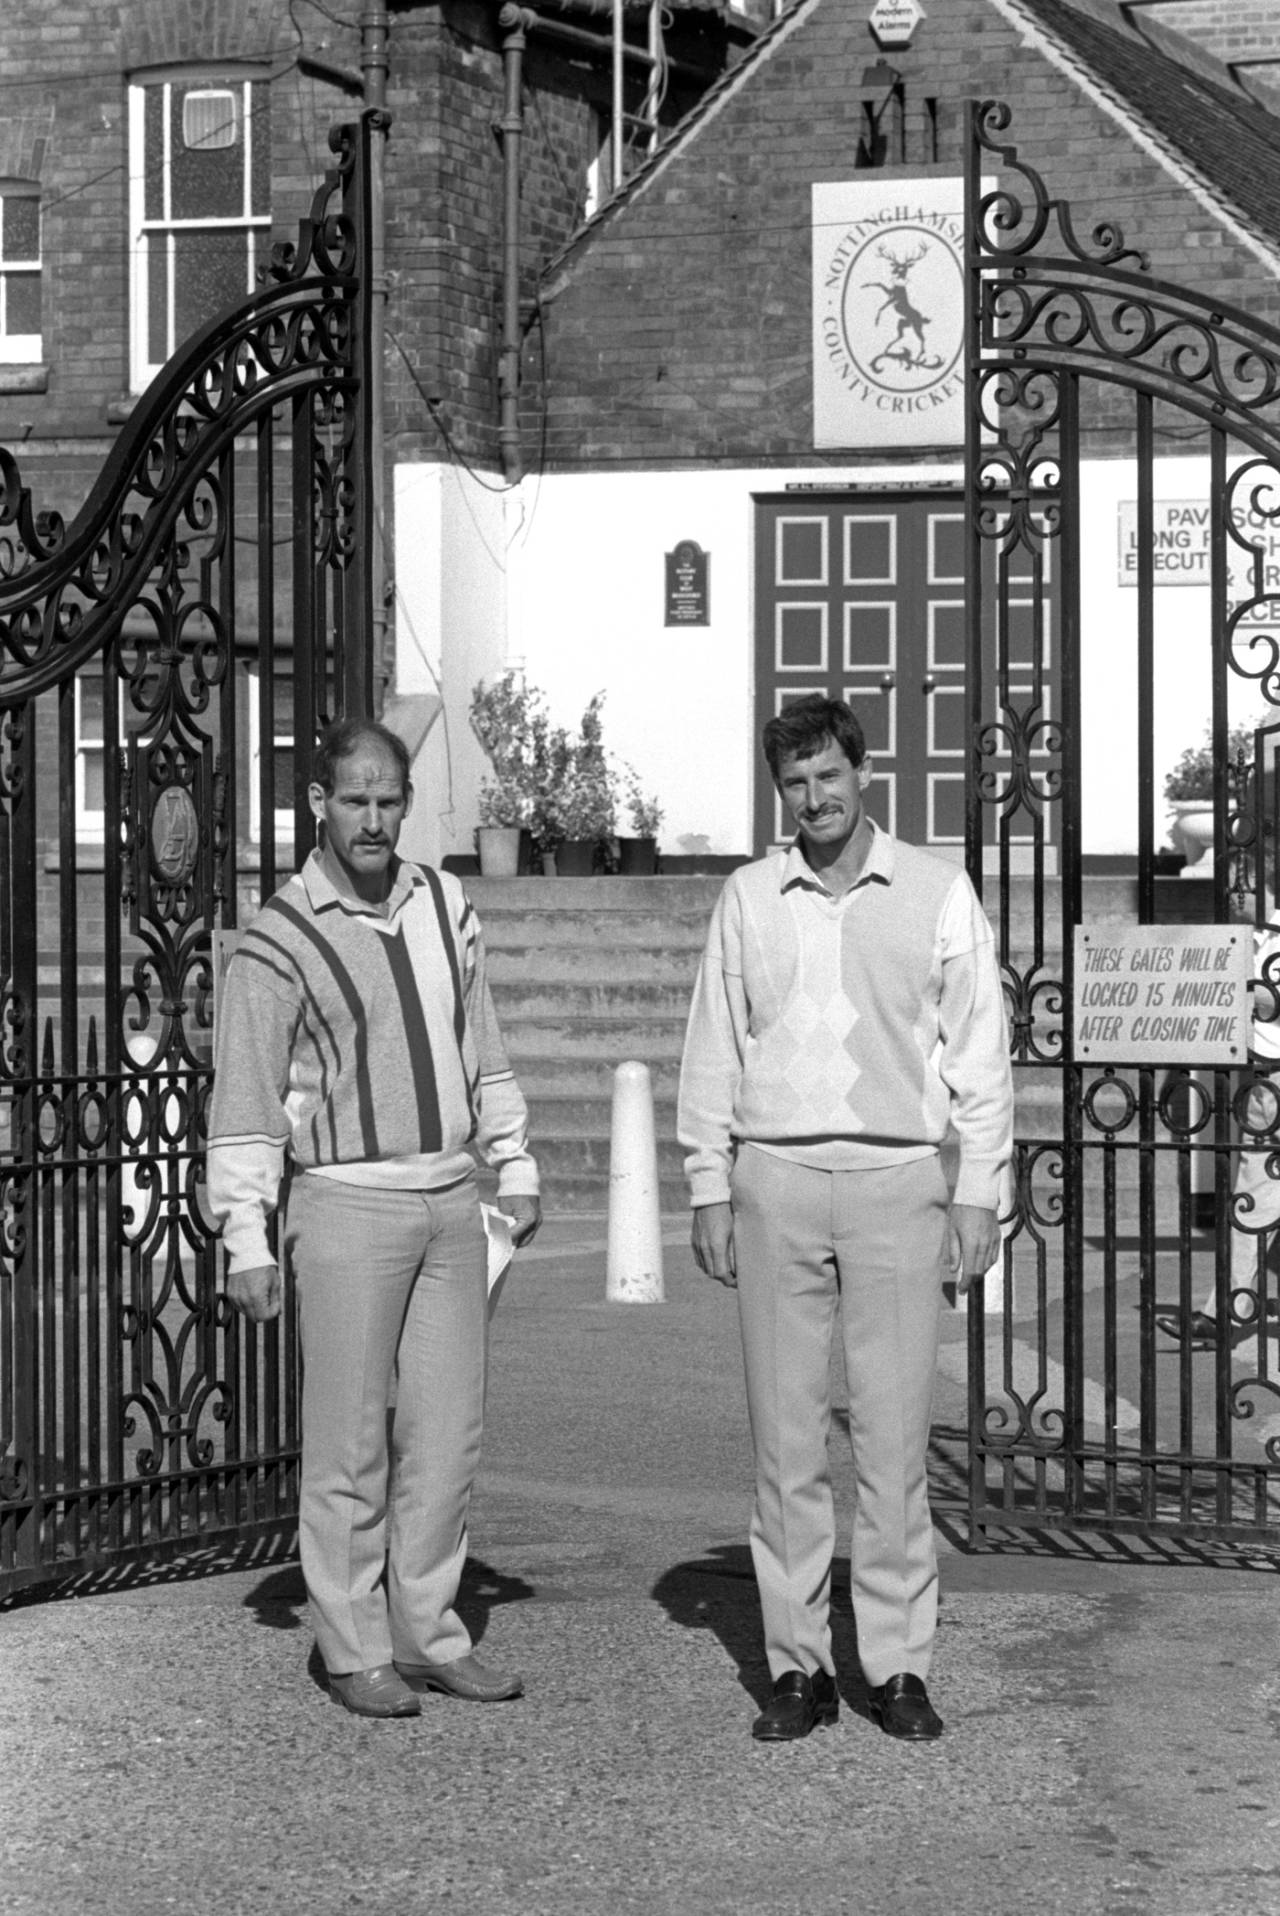 Richard Hadlee and Clive Rice stand at the gates of Trent Bridge, September 17, 1987